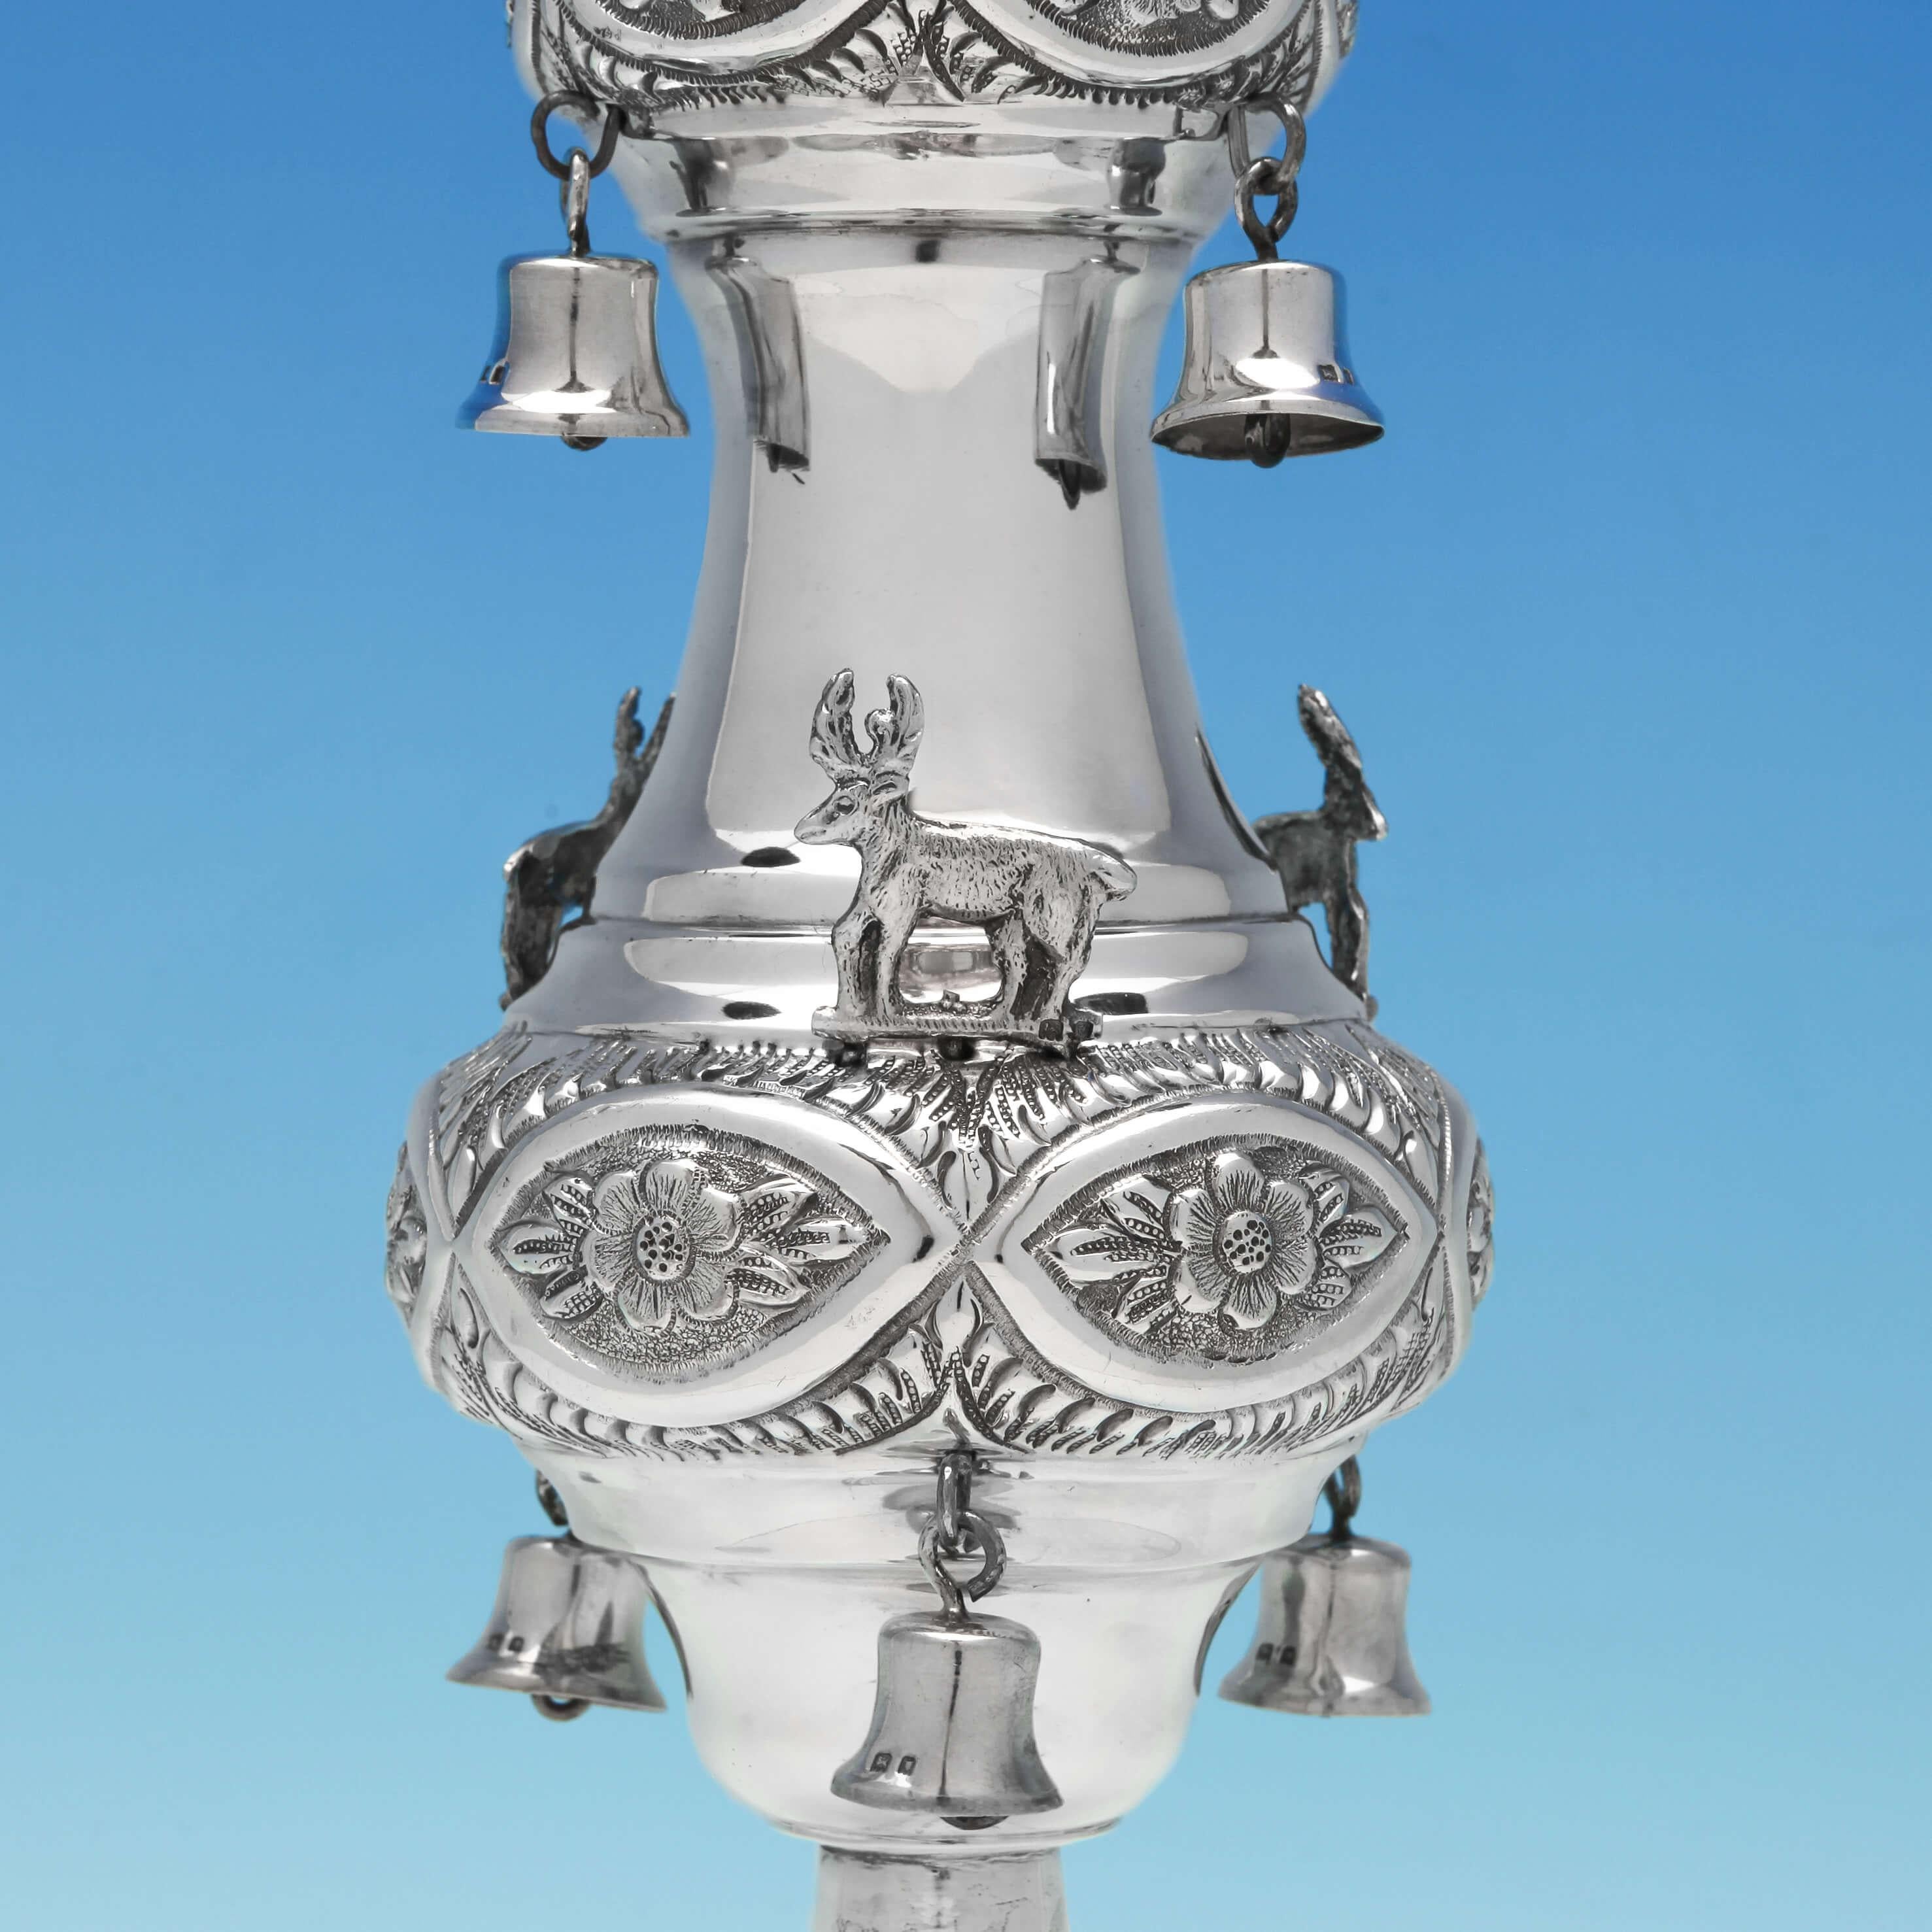 Hallmarked in London in 1920 by Maurice Salkind, this impressive pair of sterling silver Rimonim feature floral chasing, eagle finials, deer, hanging bells and beaded bases. The handles have been engraved with Hebrew script. Each Rimonim stands